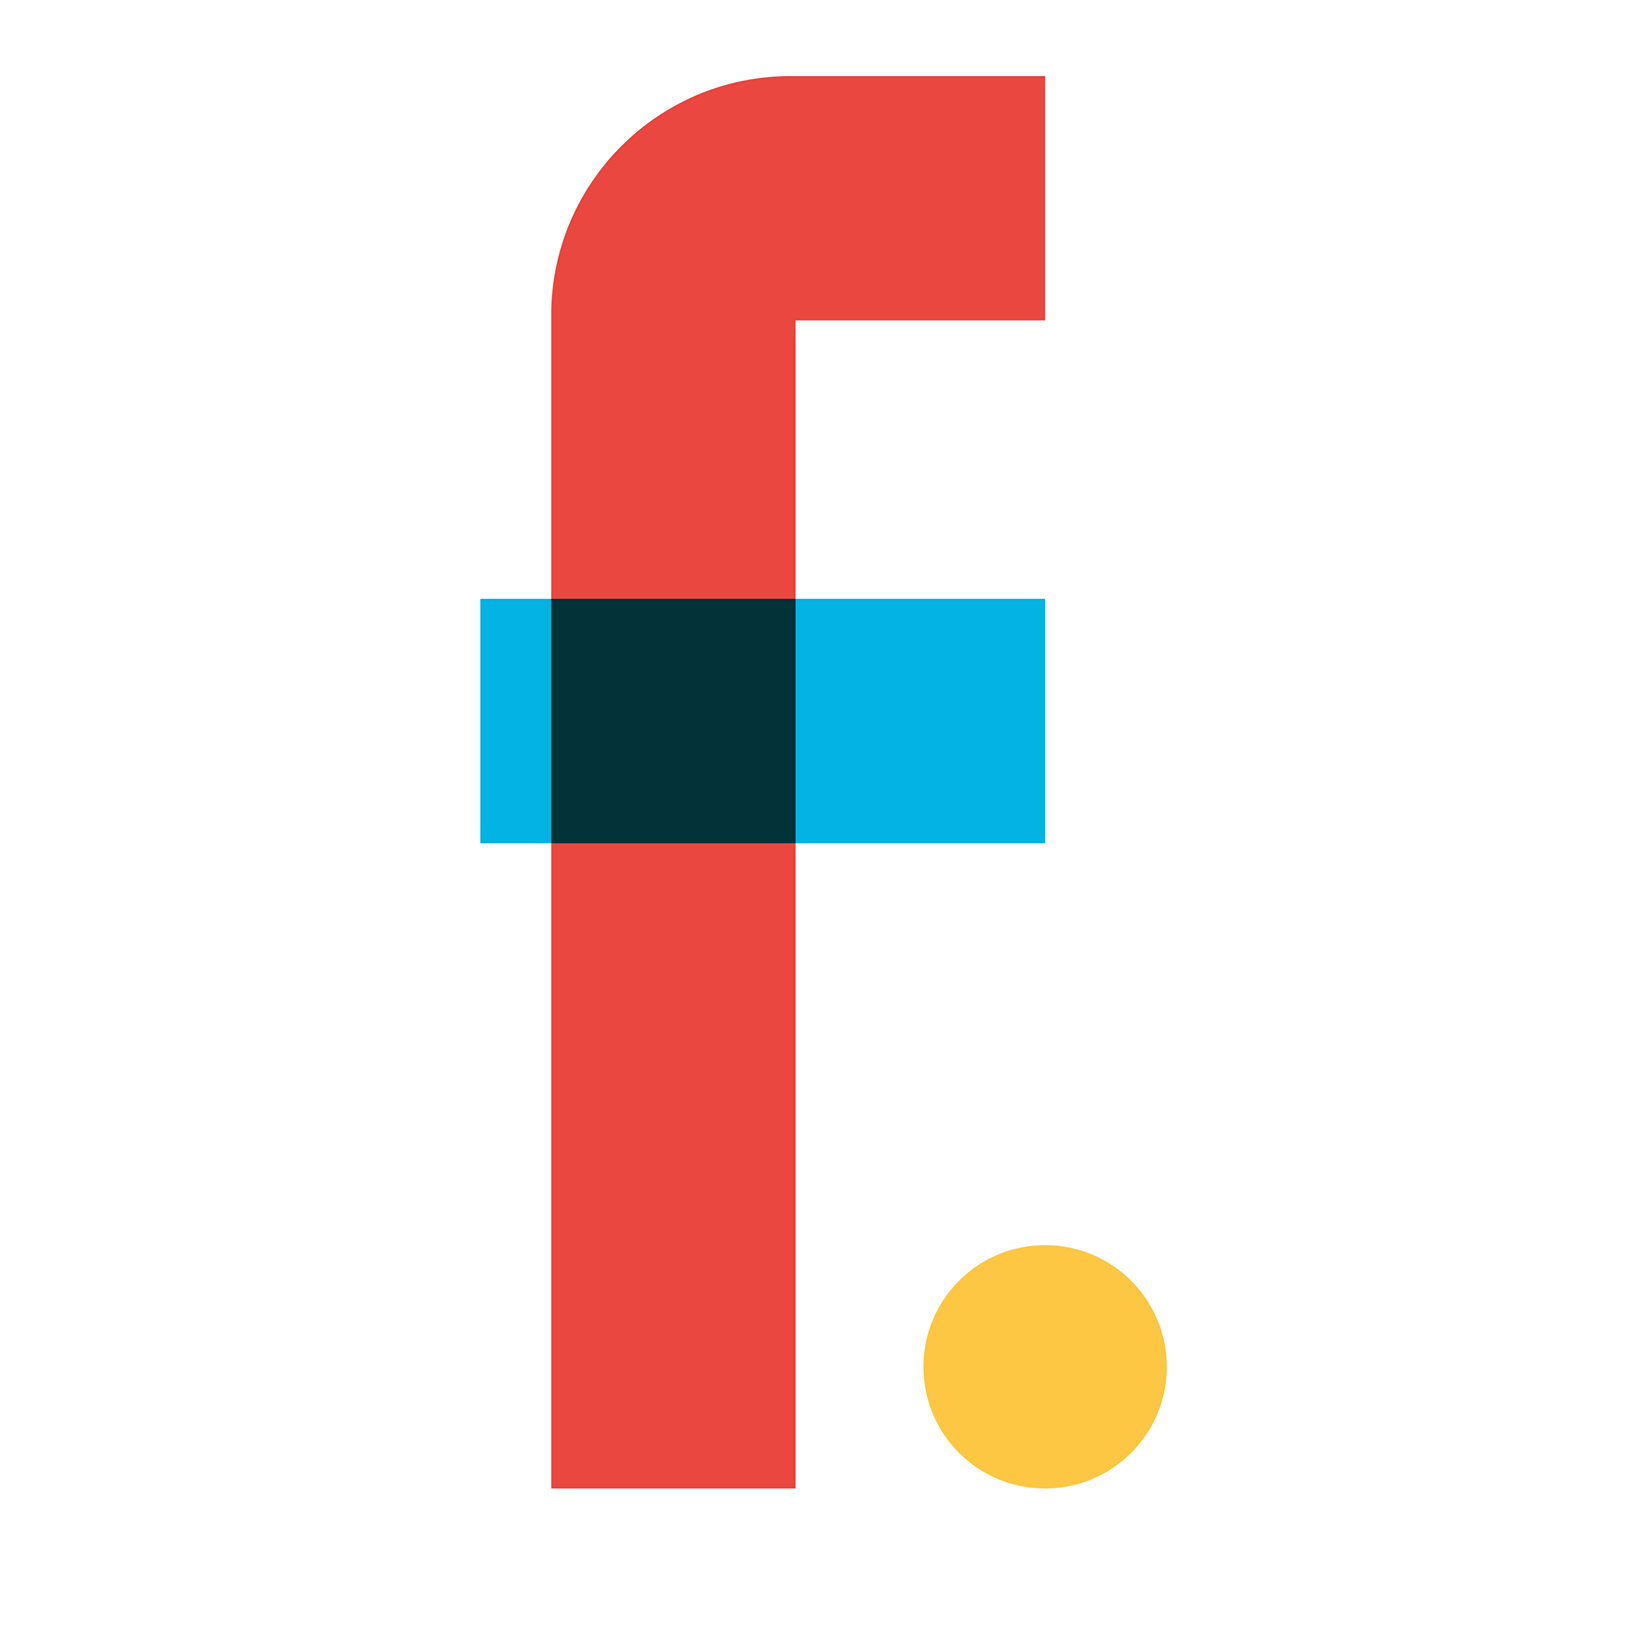 Favoured - Reviews, News and Ratings